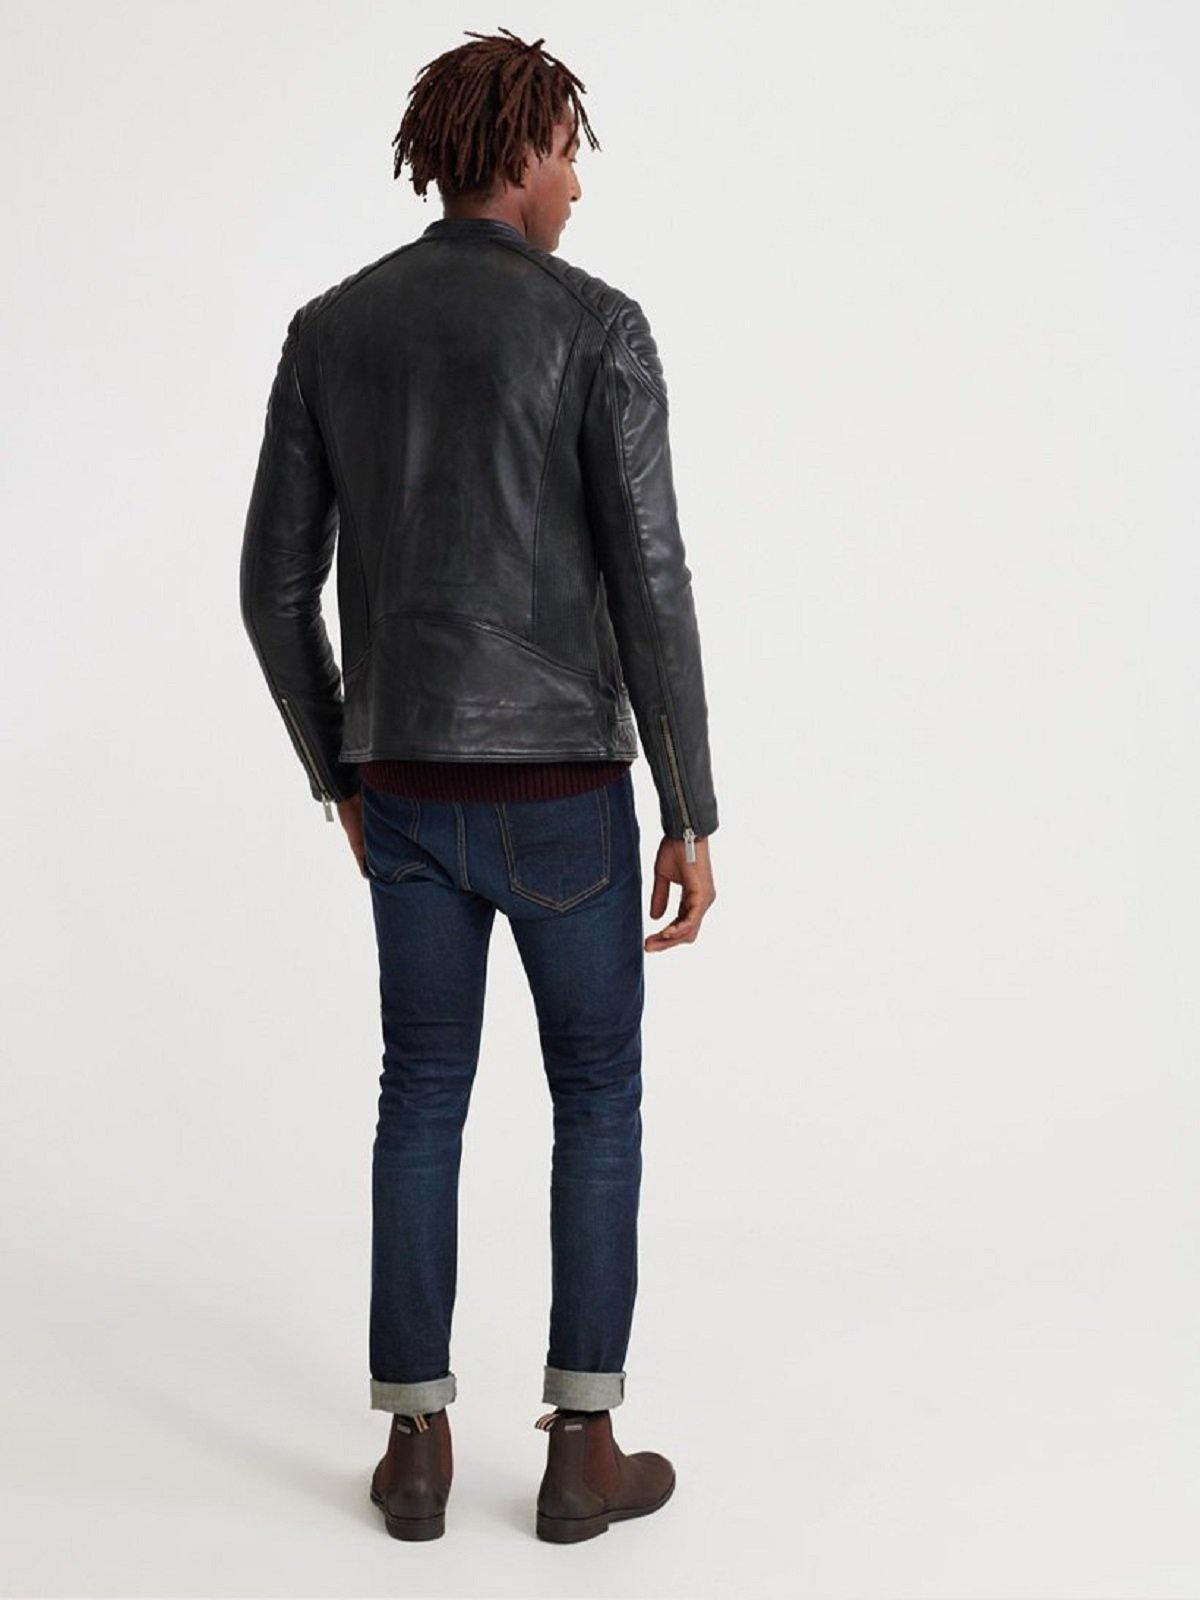 City Racer Leather Jacket For Men - Wiseleather